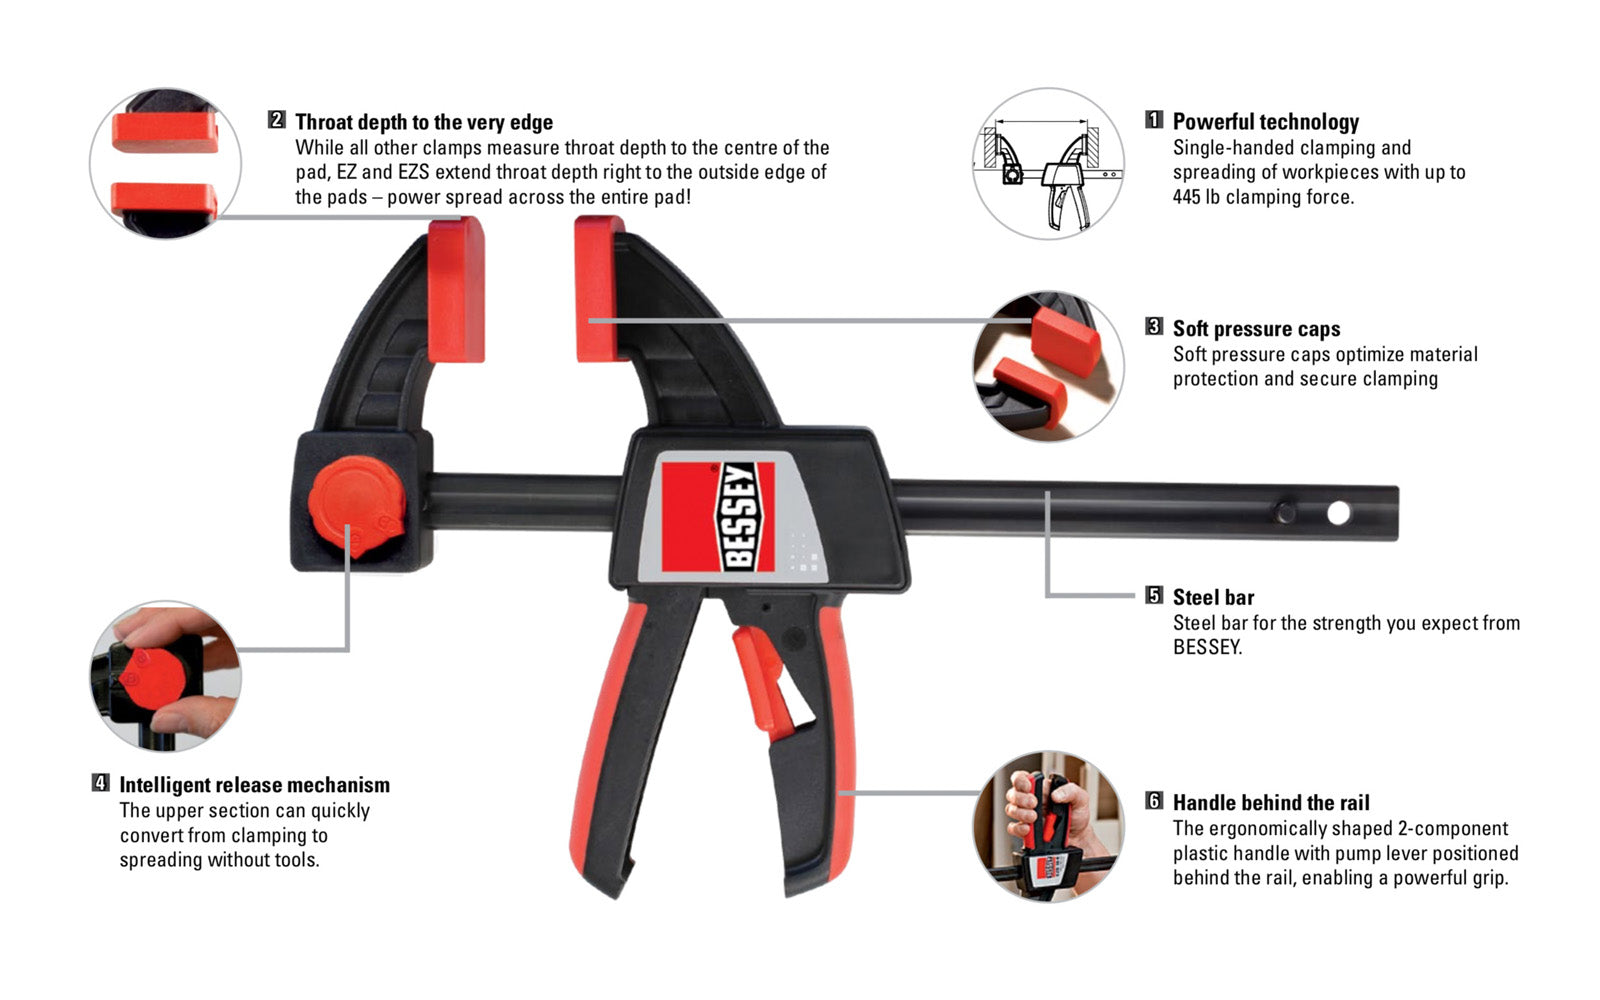 Bessey 18" One-Handed Clamp ~ EZS 45-8. 18" max opening - 3-1/2" throat depth. Intelligent release mechanism on clamp, the upper section can quickly convert from clamping to spreading without tools. Soft pads. 445 lbs. clamping force. Well balanced, ergonomic design for easy, single-handed use. 788502200233